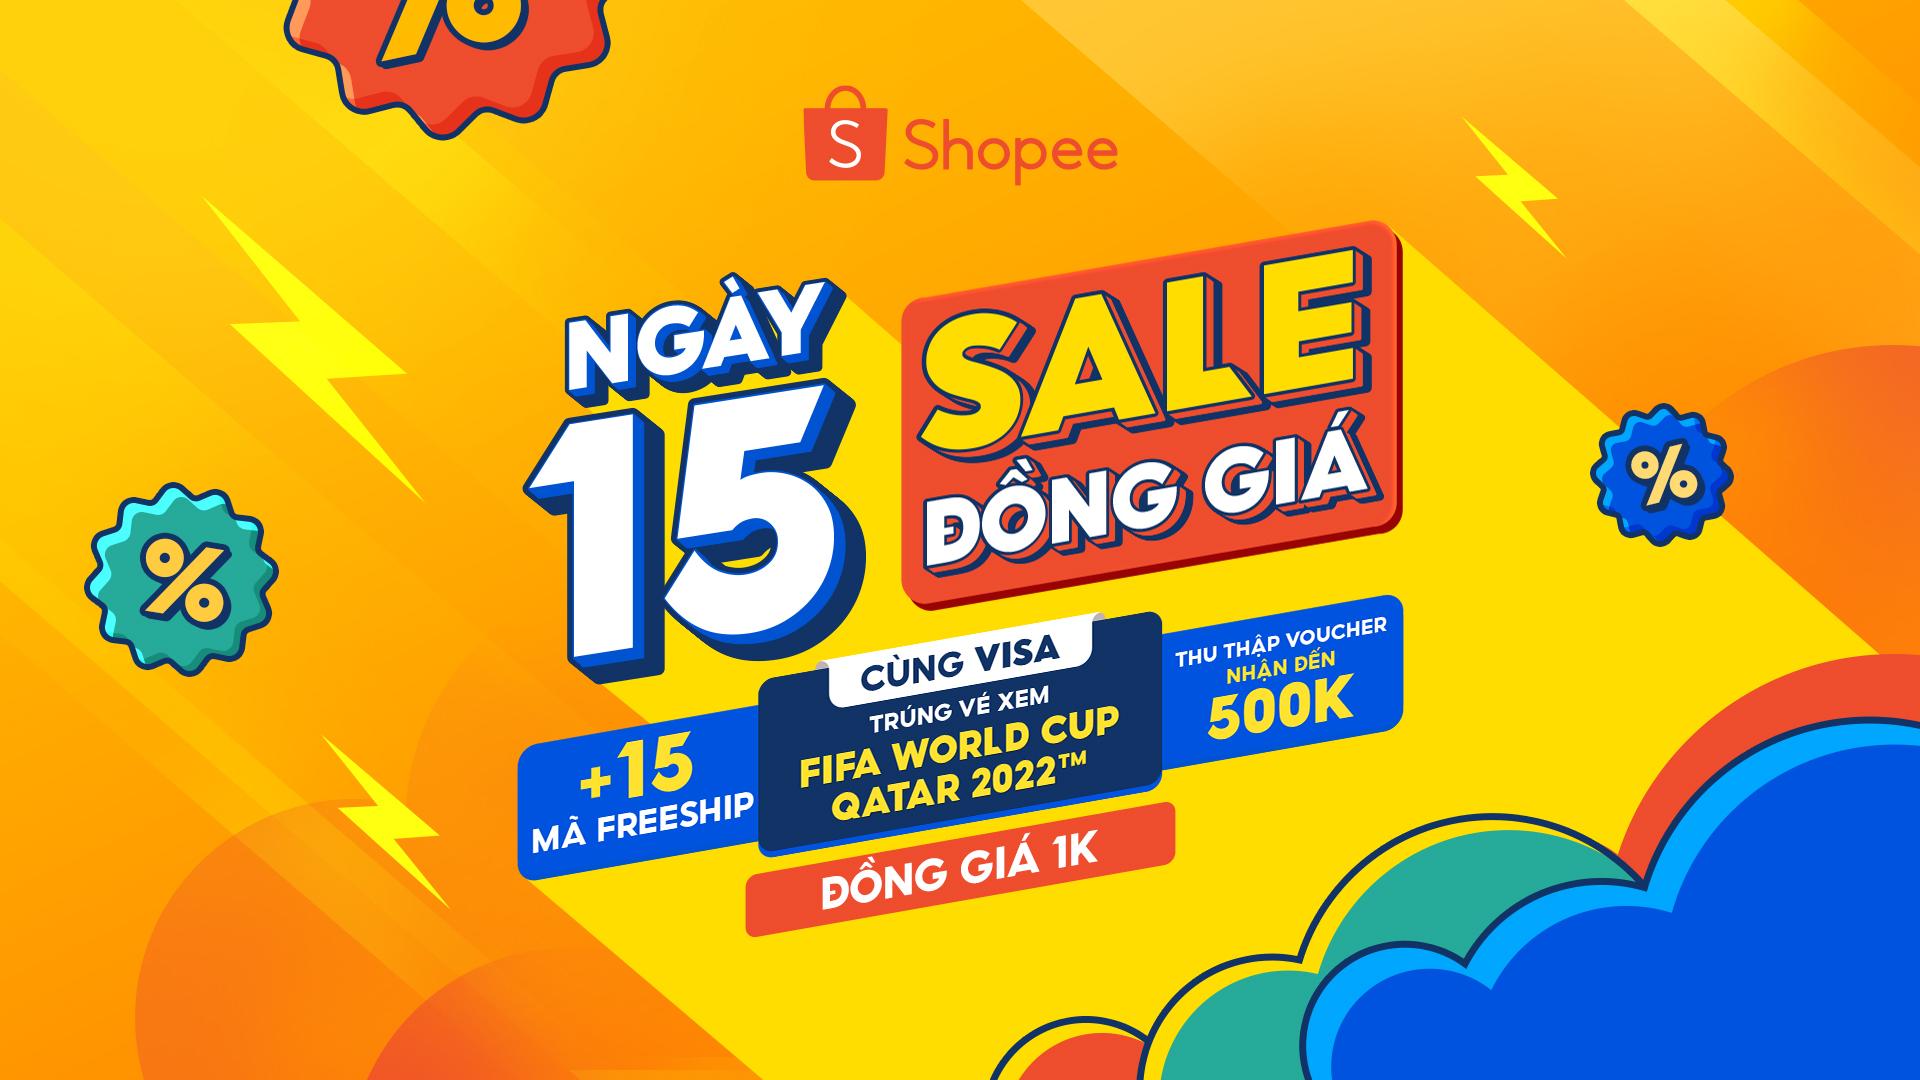 In the middle of the month, Shopee has a big sale: Same price 1K, chance to win tickets to watch FIFA World Cup 2022 - Photo 1.